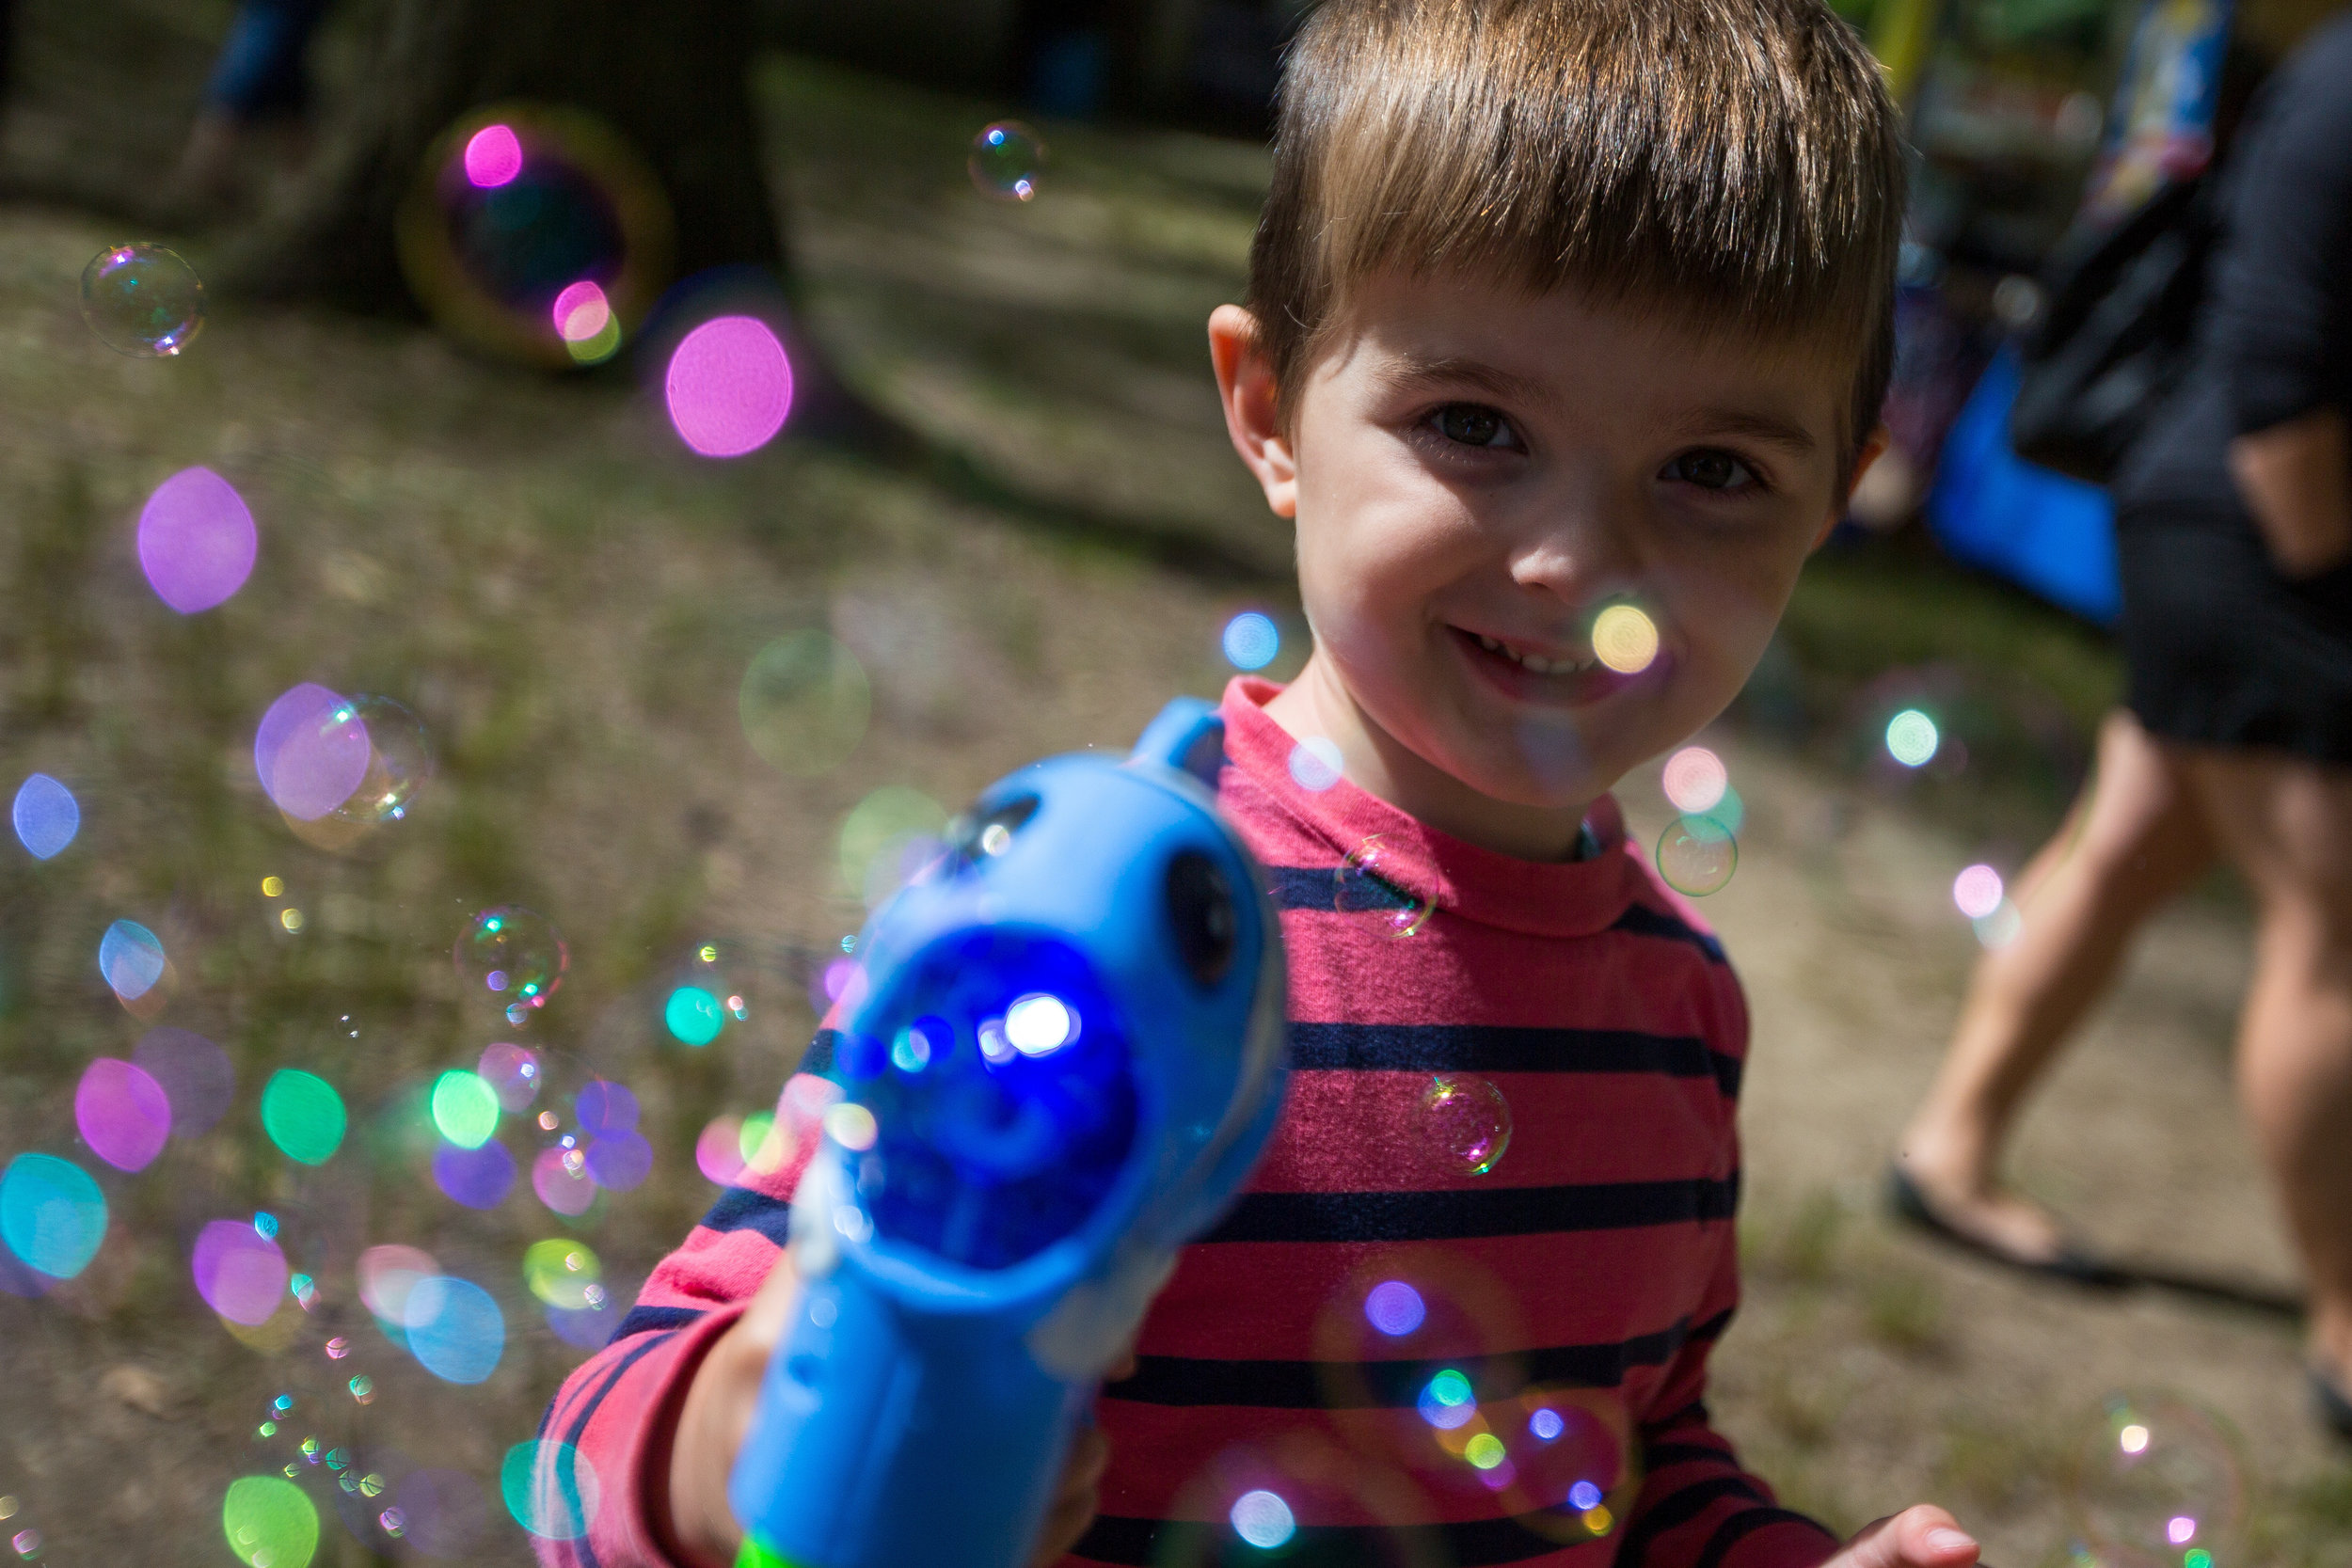  Benson Puff, 3, plays with a bubble machine at the Ellwood City Arts Festival at Ewing Park on Saturday morning.  